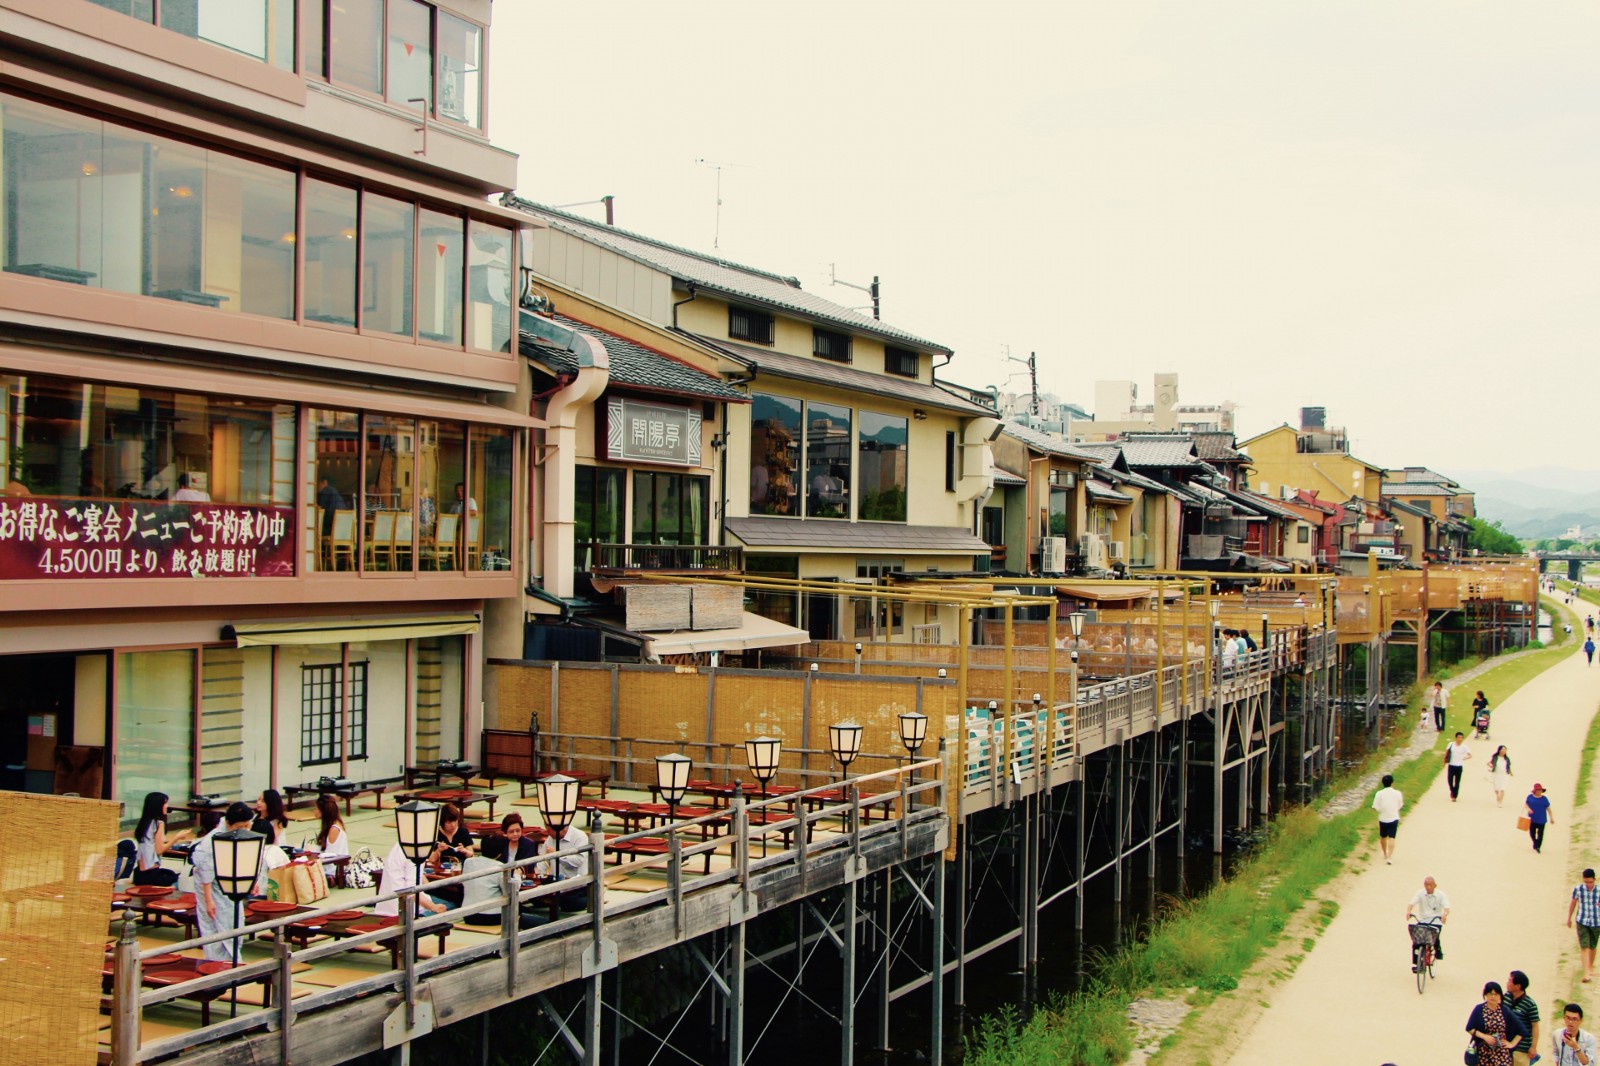 Cafes/restaurants with the Kawadoko terrace by Kamogawa River